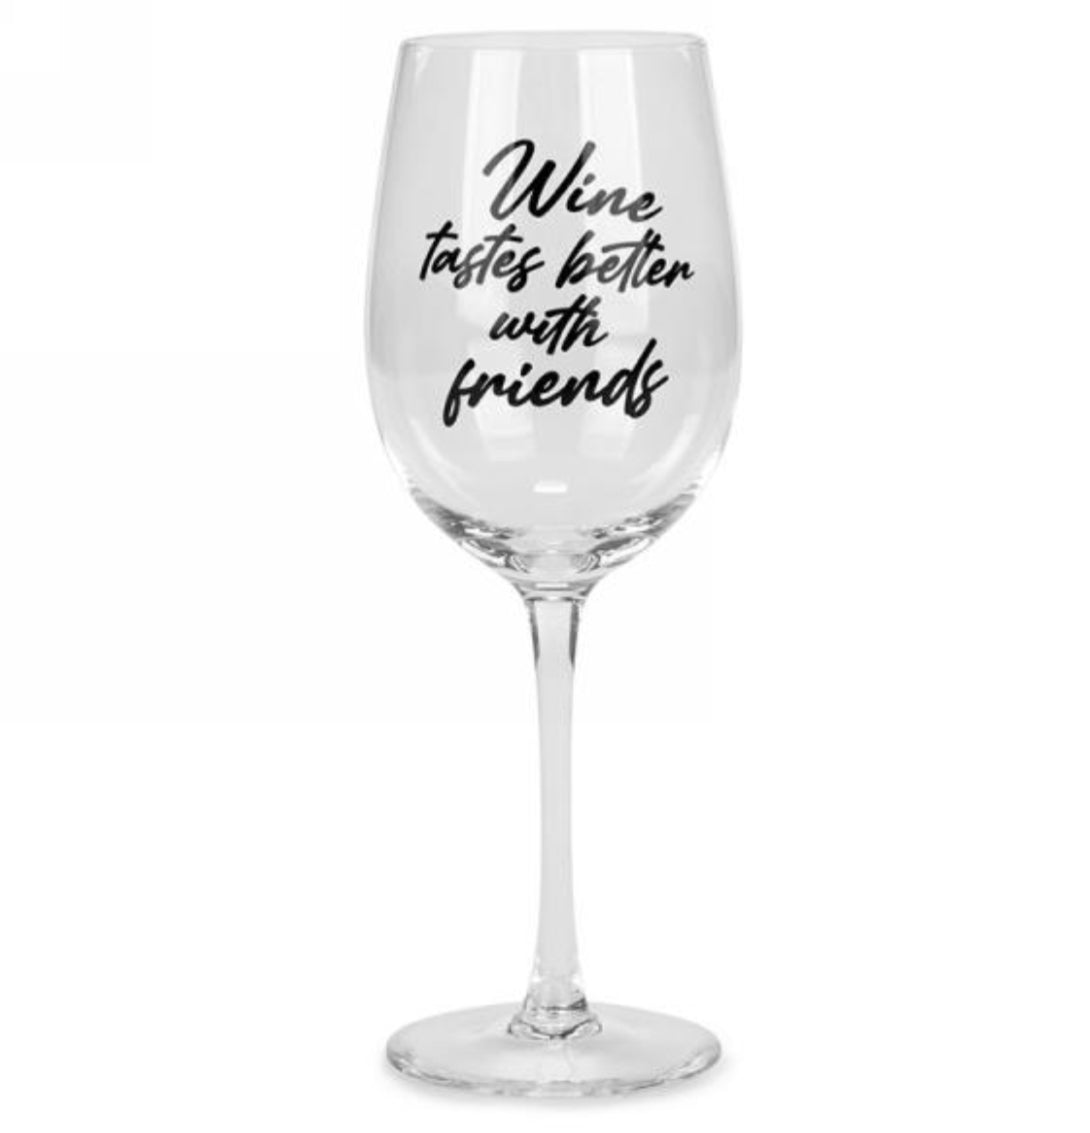 Wine Tastes Better With Friends Wineglass